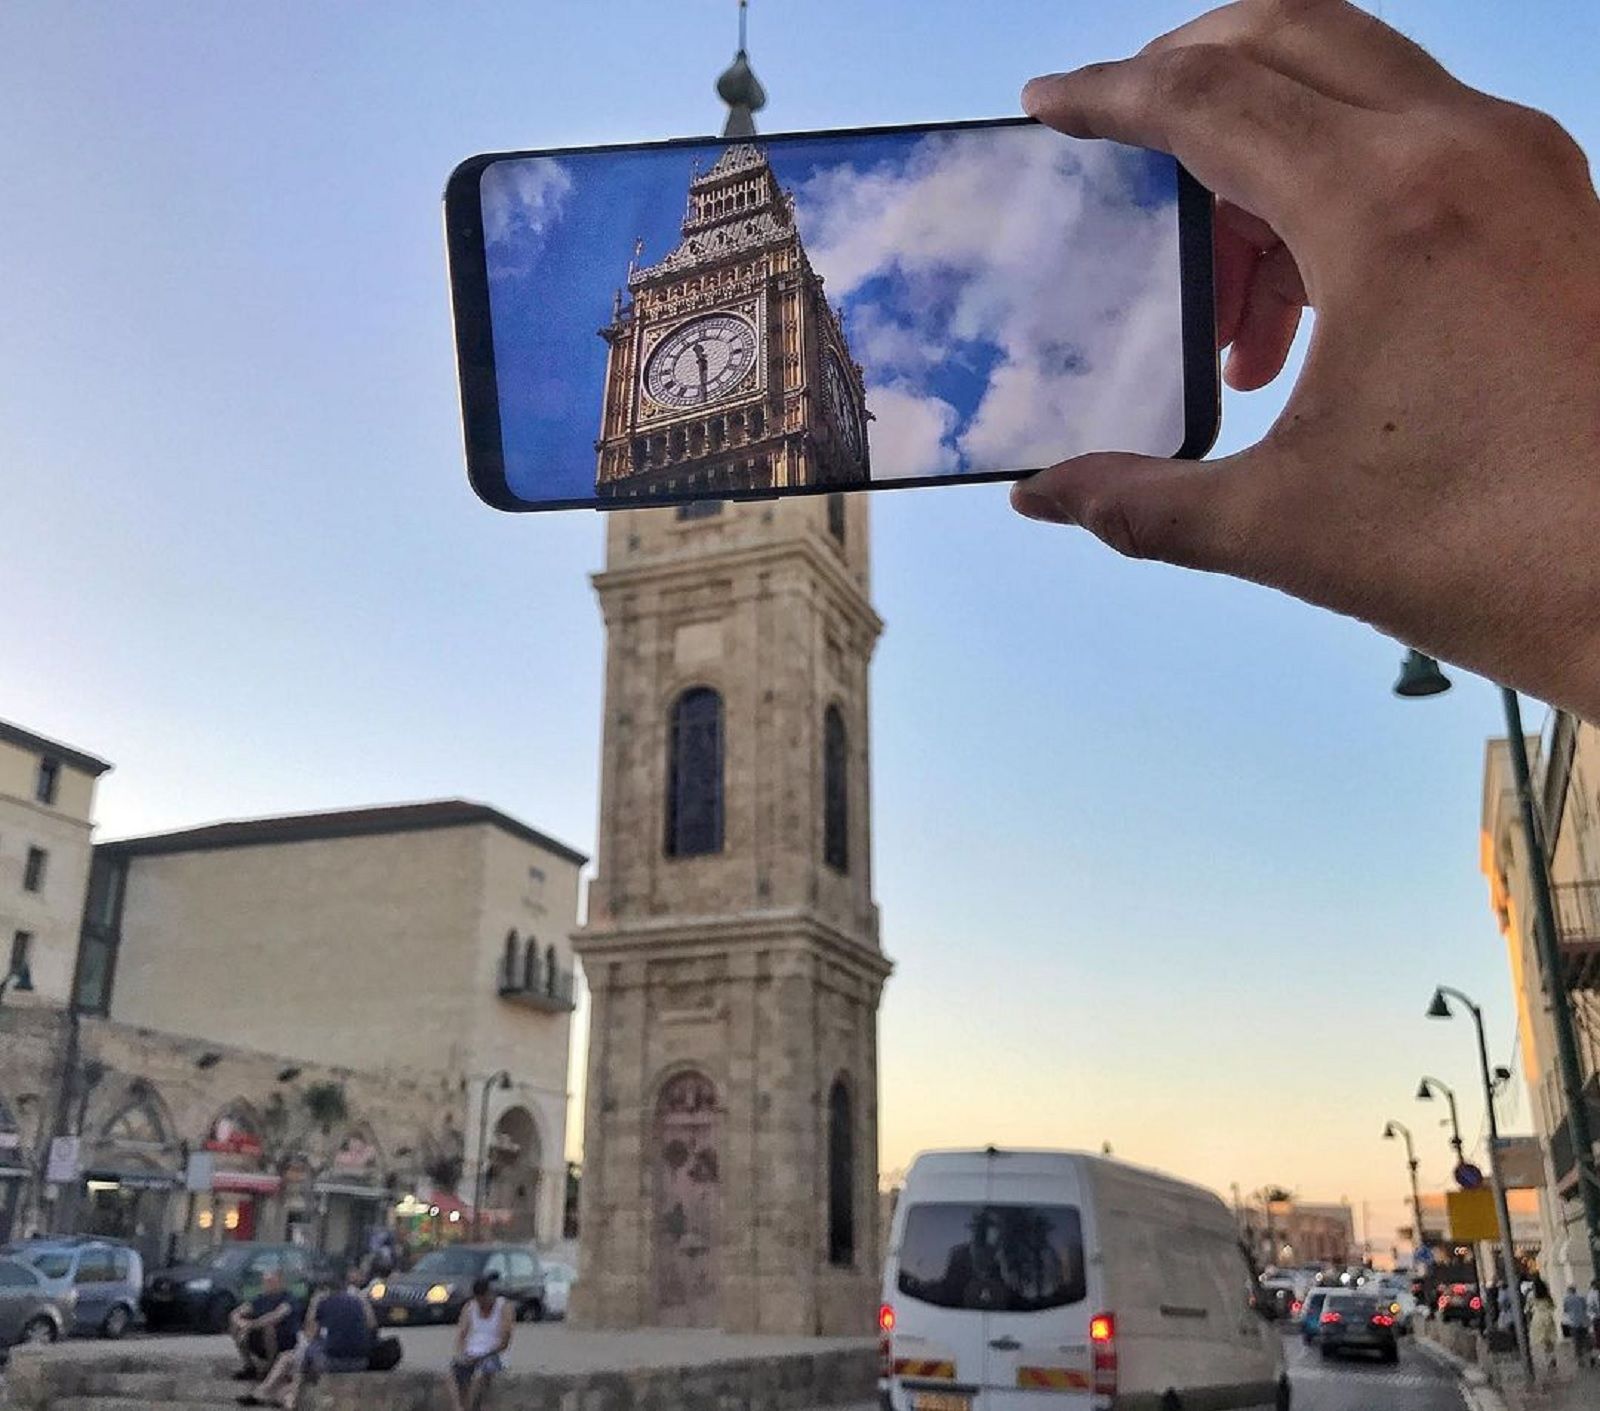 It's all about perspective with these smartphone photos photo 11